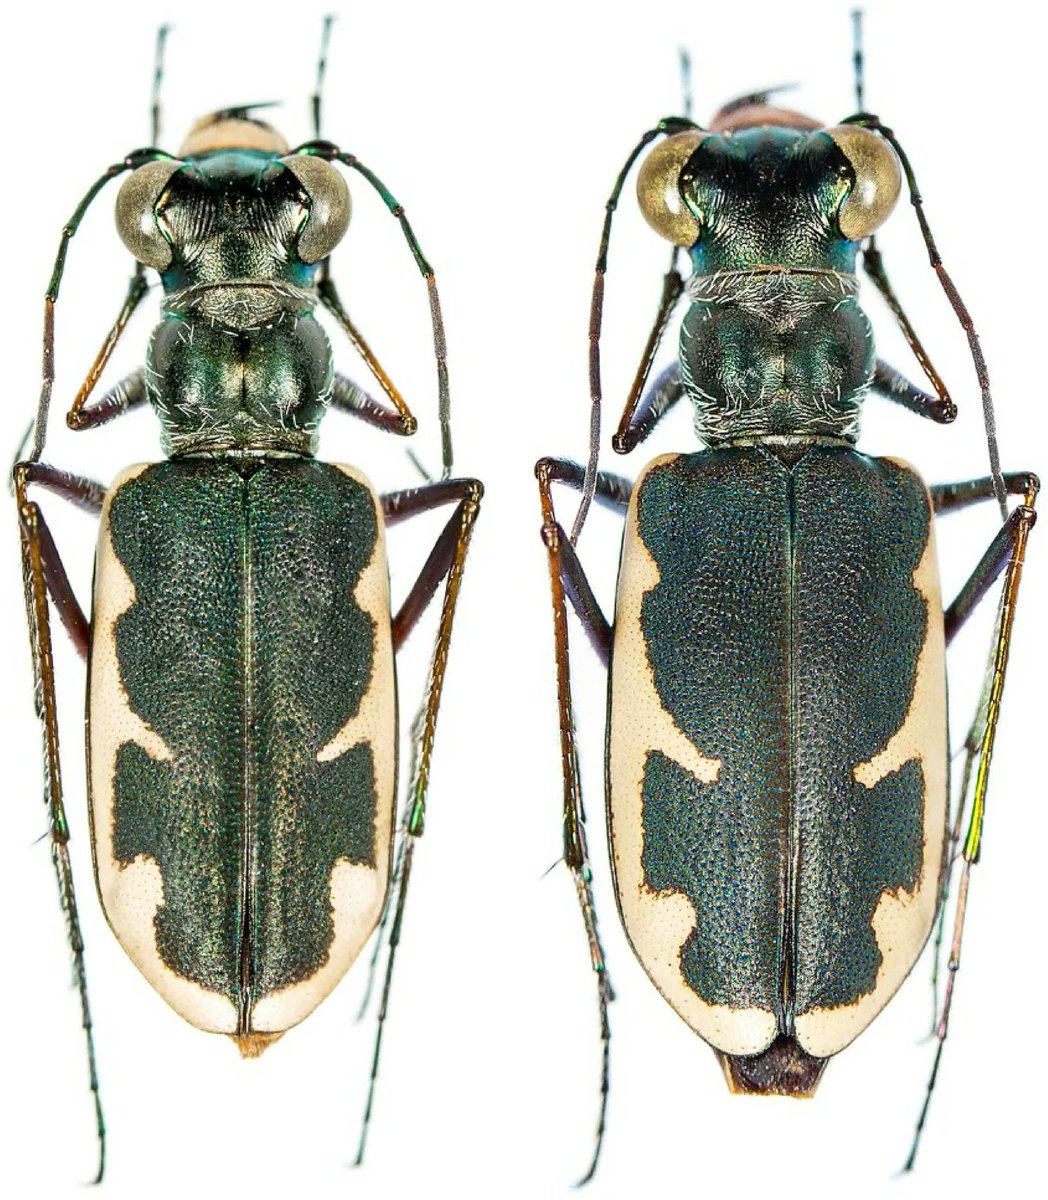 Dear World - Meet the Eunota houstoniana! A #NewSpecies of tiger beetle discovered & described from the region around Houston, Texas. @SciReports #biodiversity